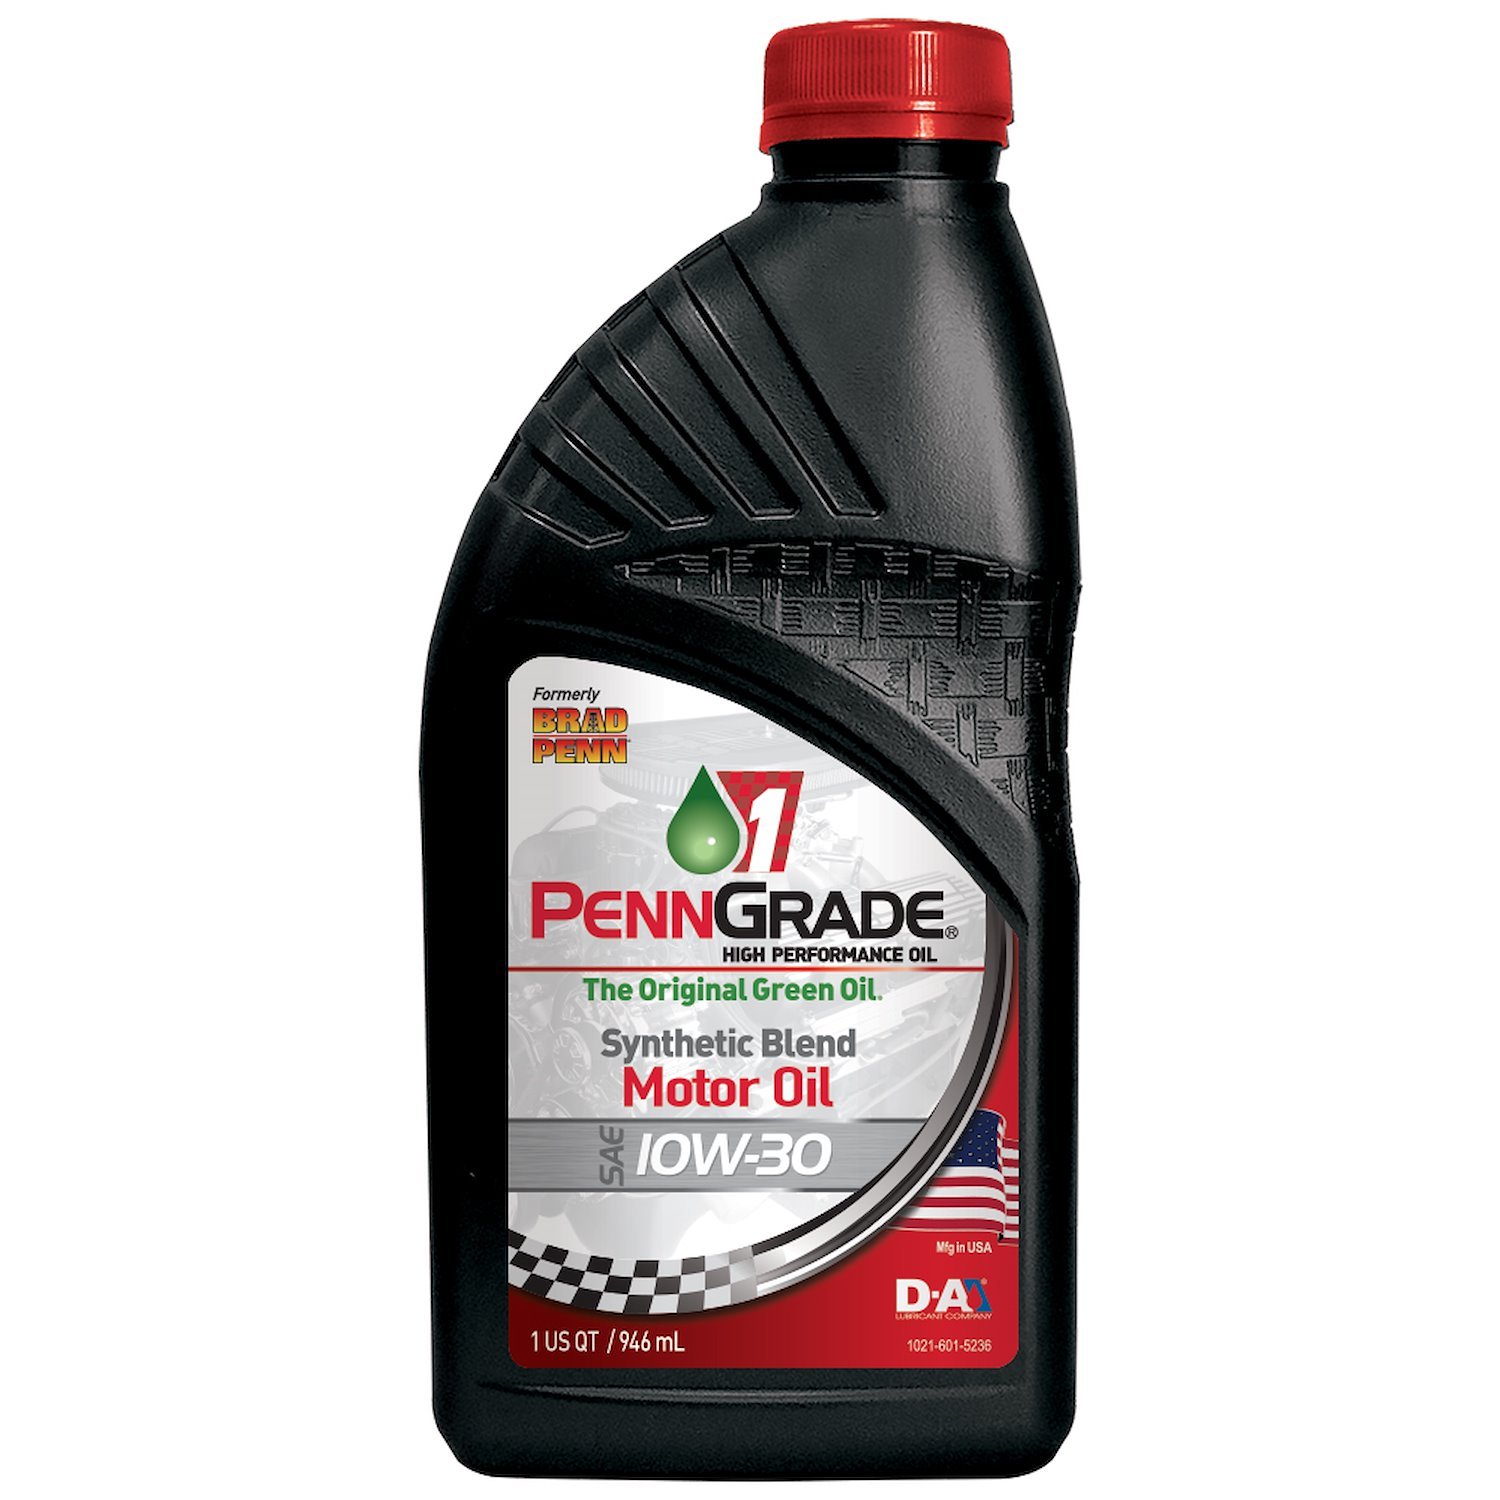 Penn-Grade 1 Partial Synthetic Motor Oil SAE 10W-30 - 12 Qts